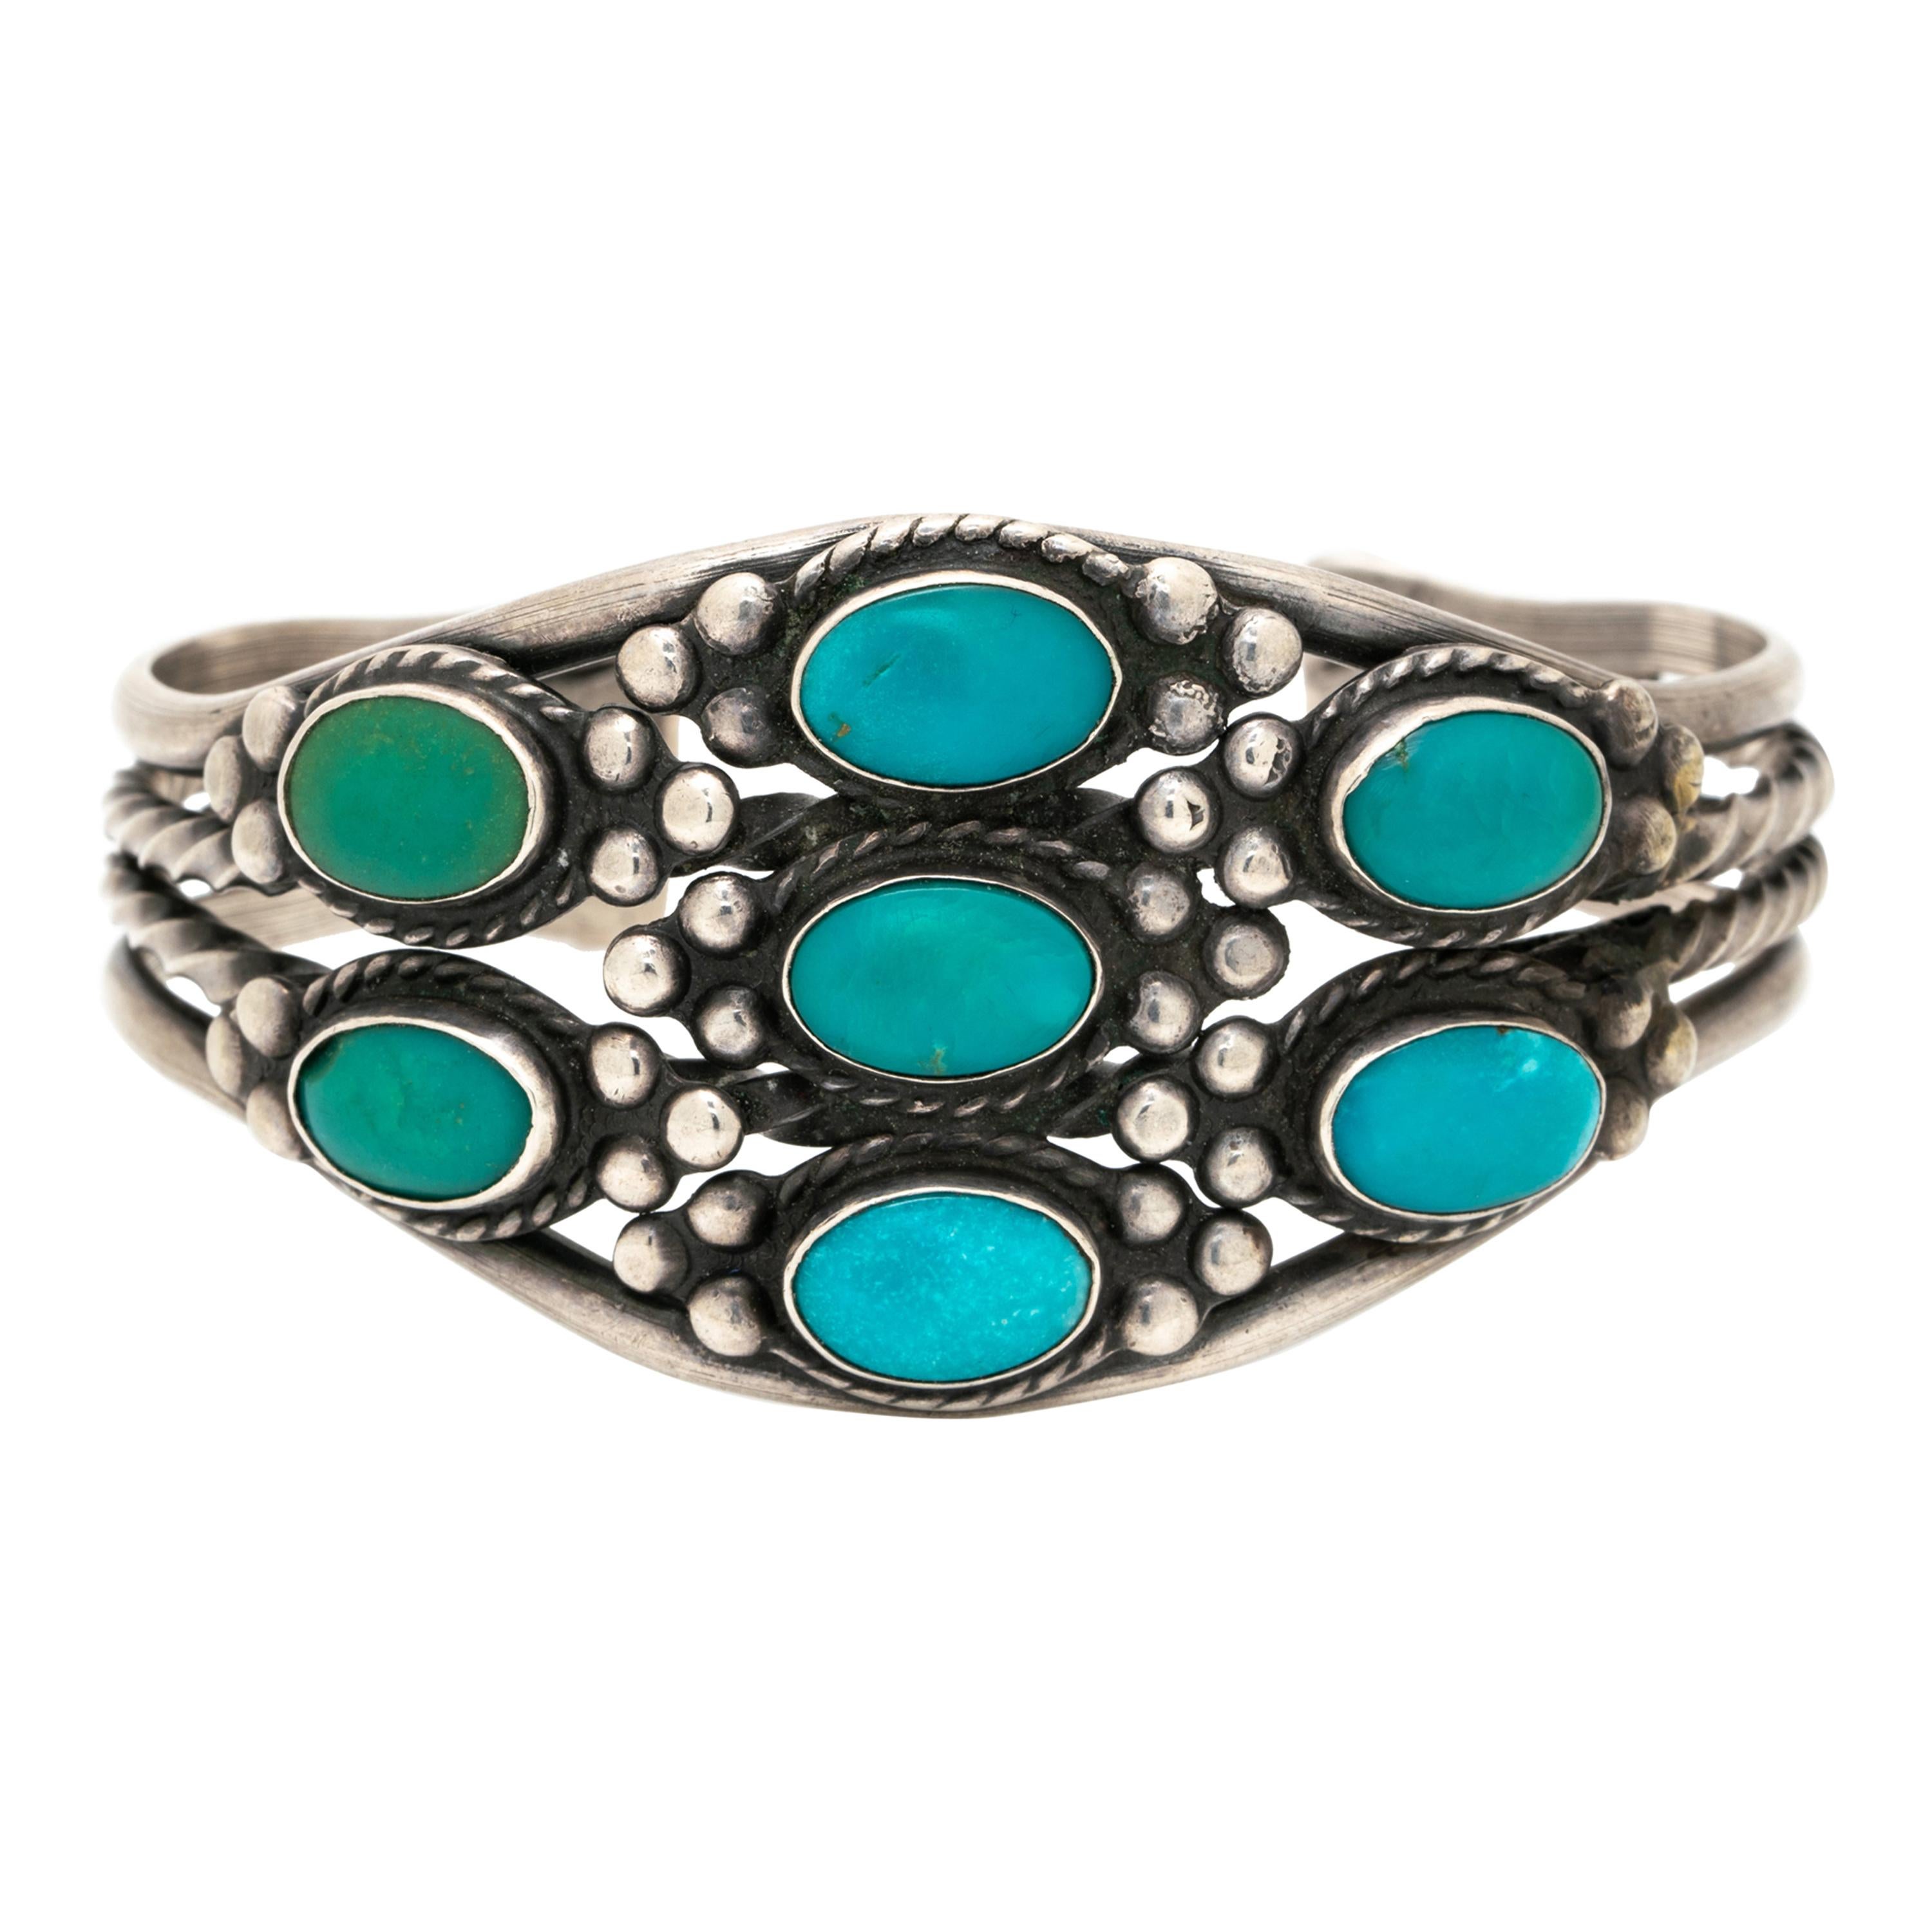 Vintage Native American Navajo Sterling and Turquoise Bracelet Cuff